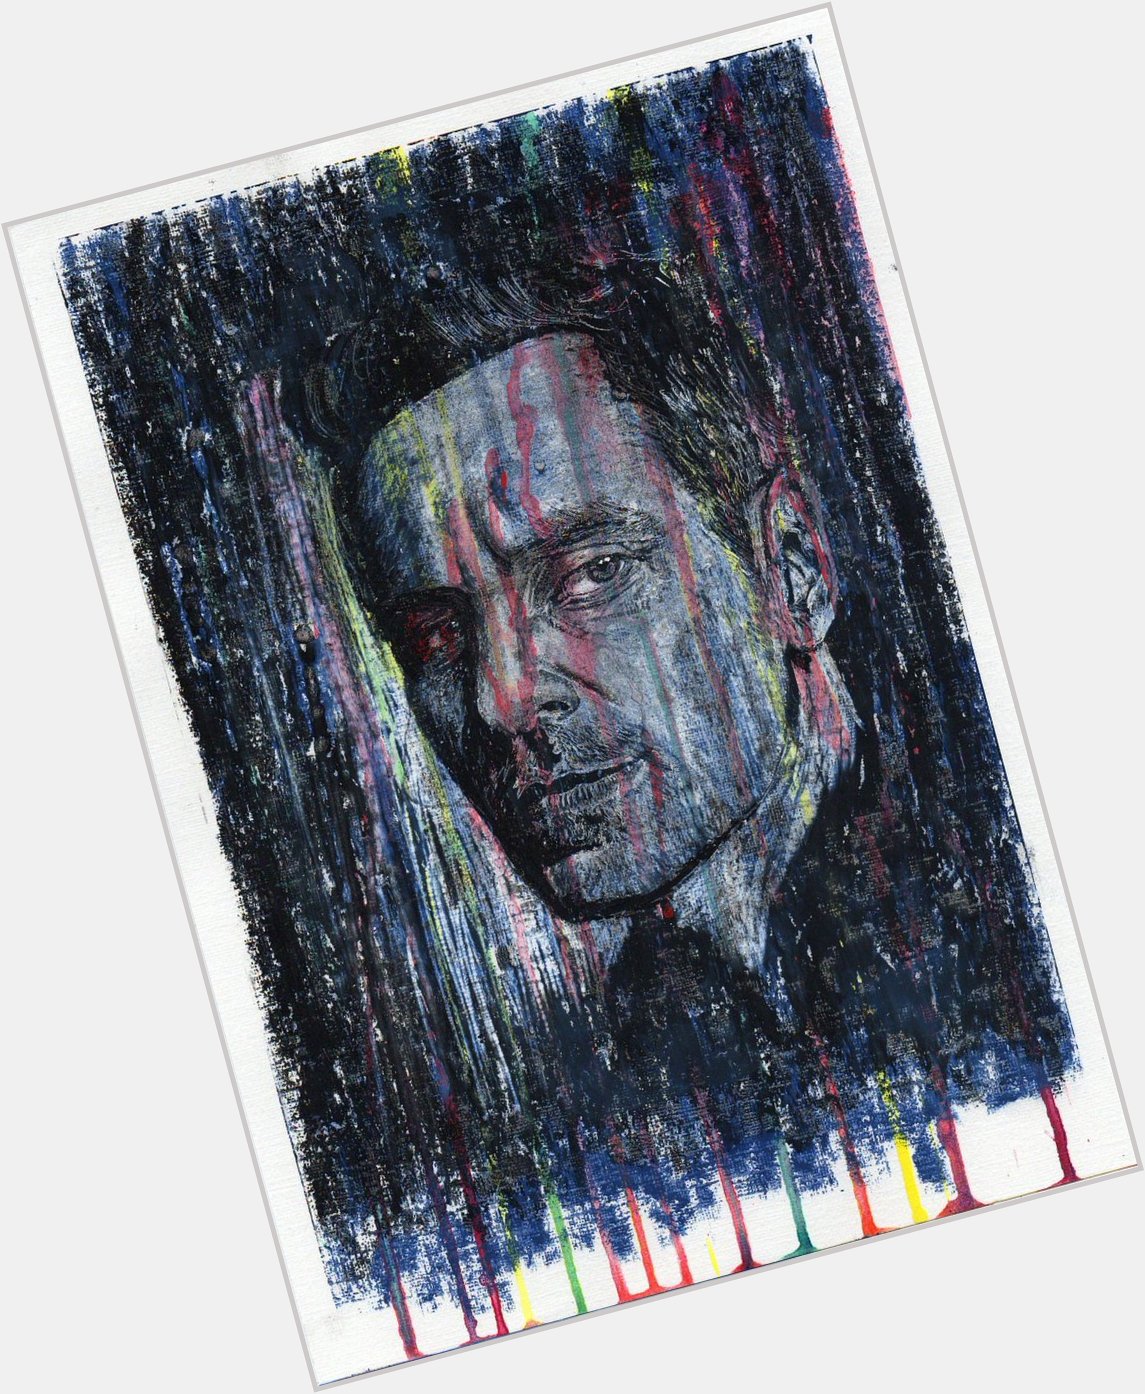 Happy birthday Michael Fassbender! This picture: oil and ink on acrylic paper, 21cm x 30cm. 